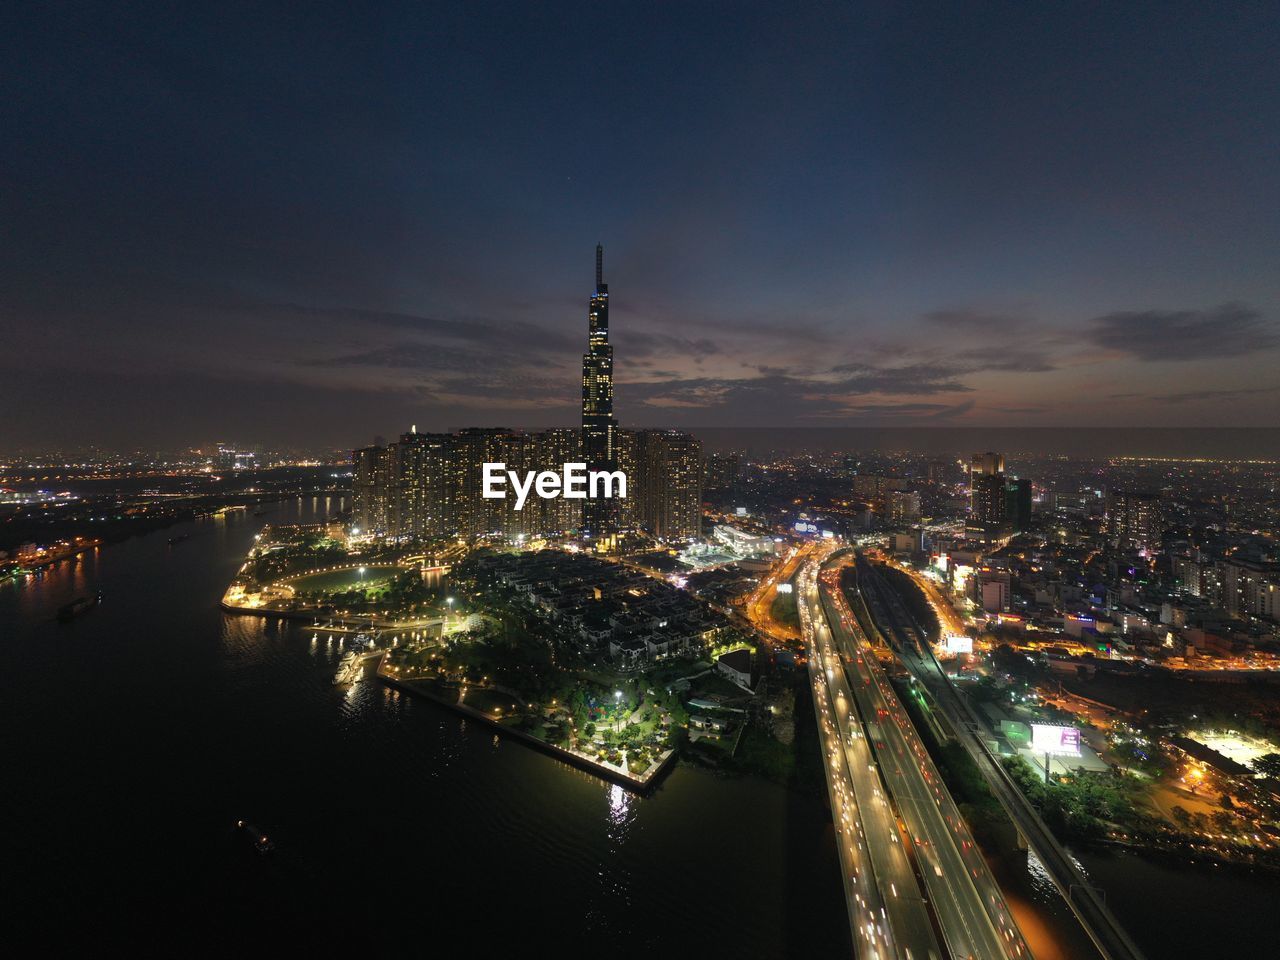 Aerial view of ho chi minh city lit up at night